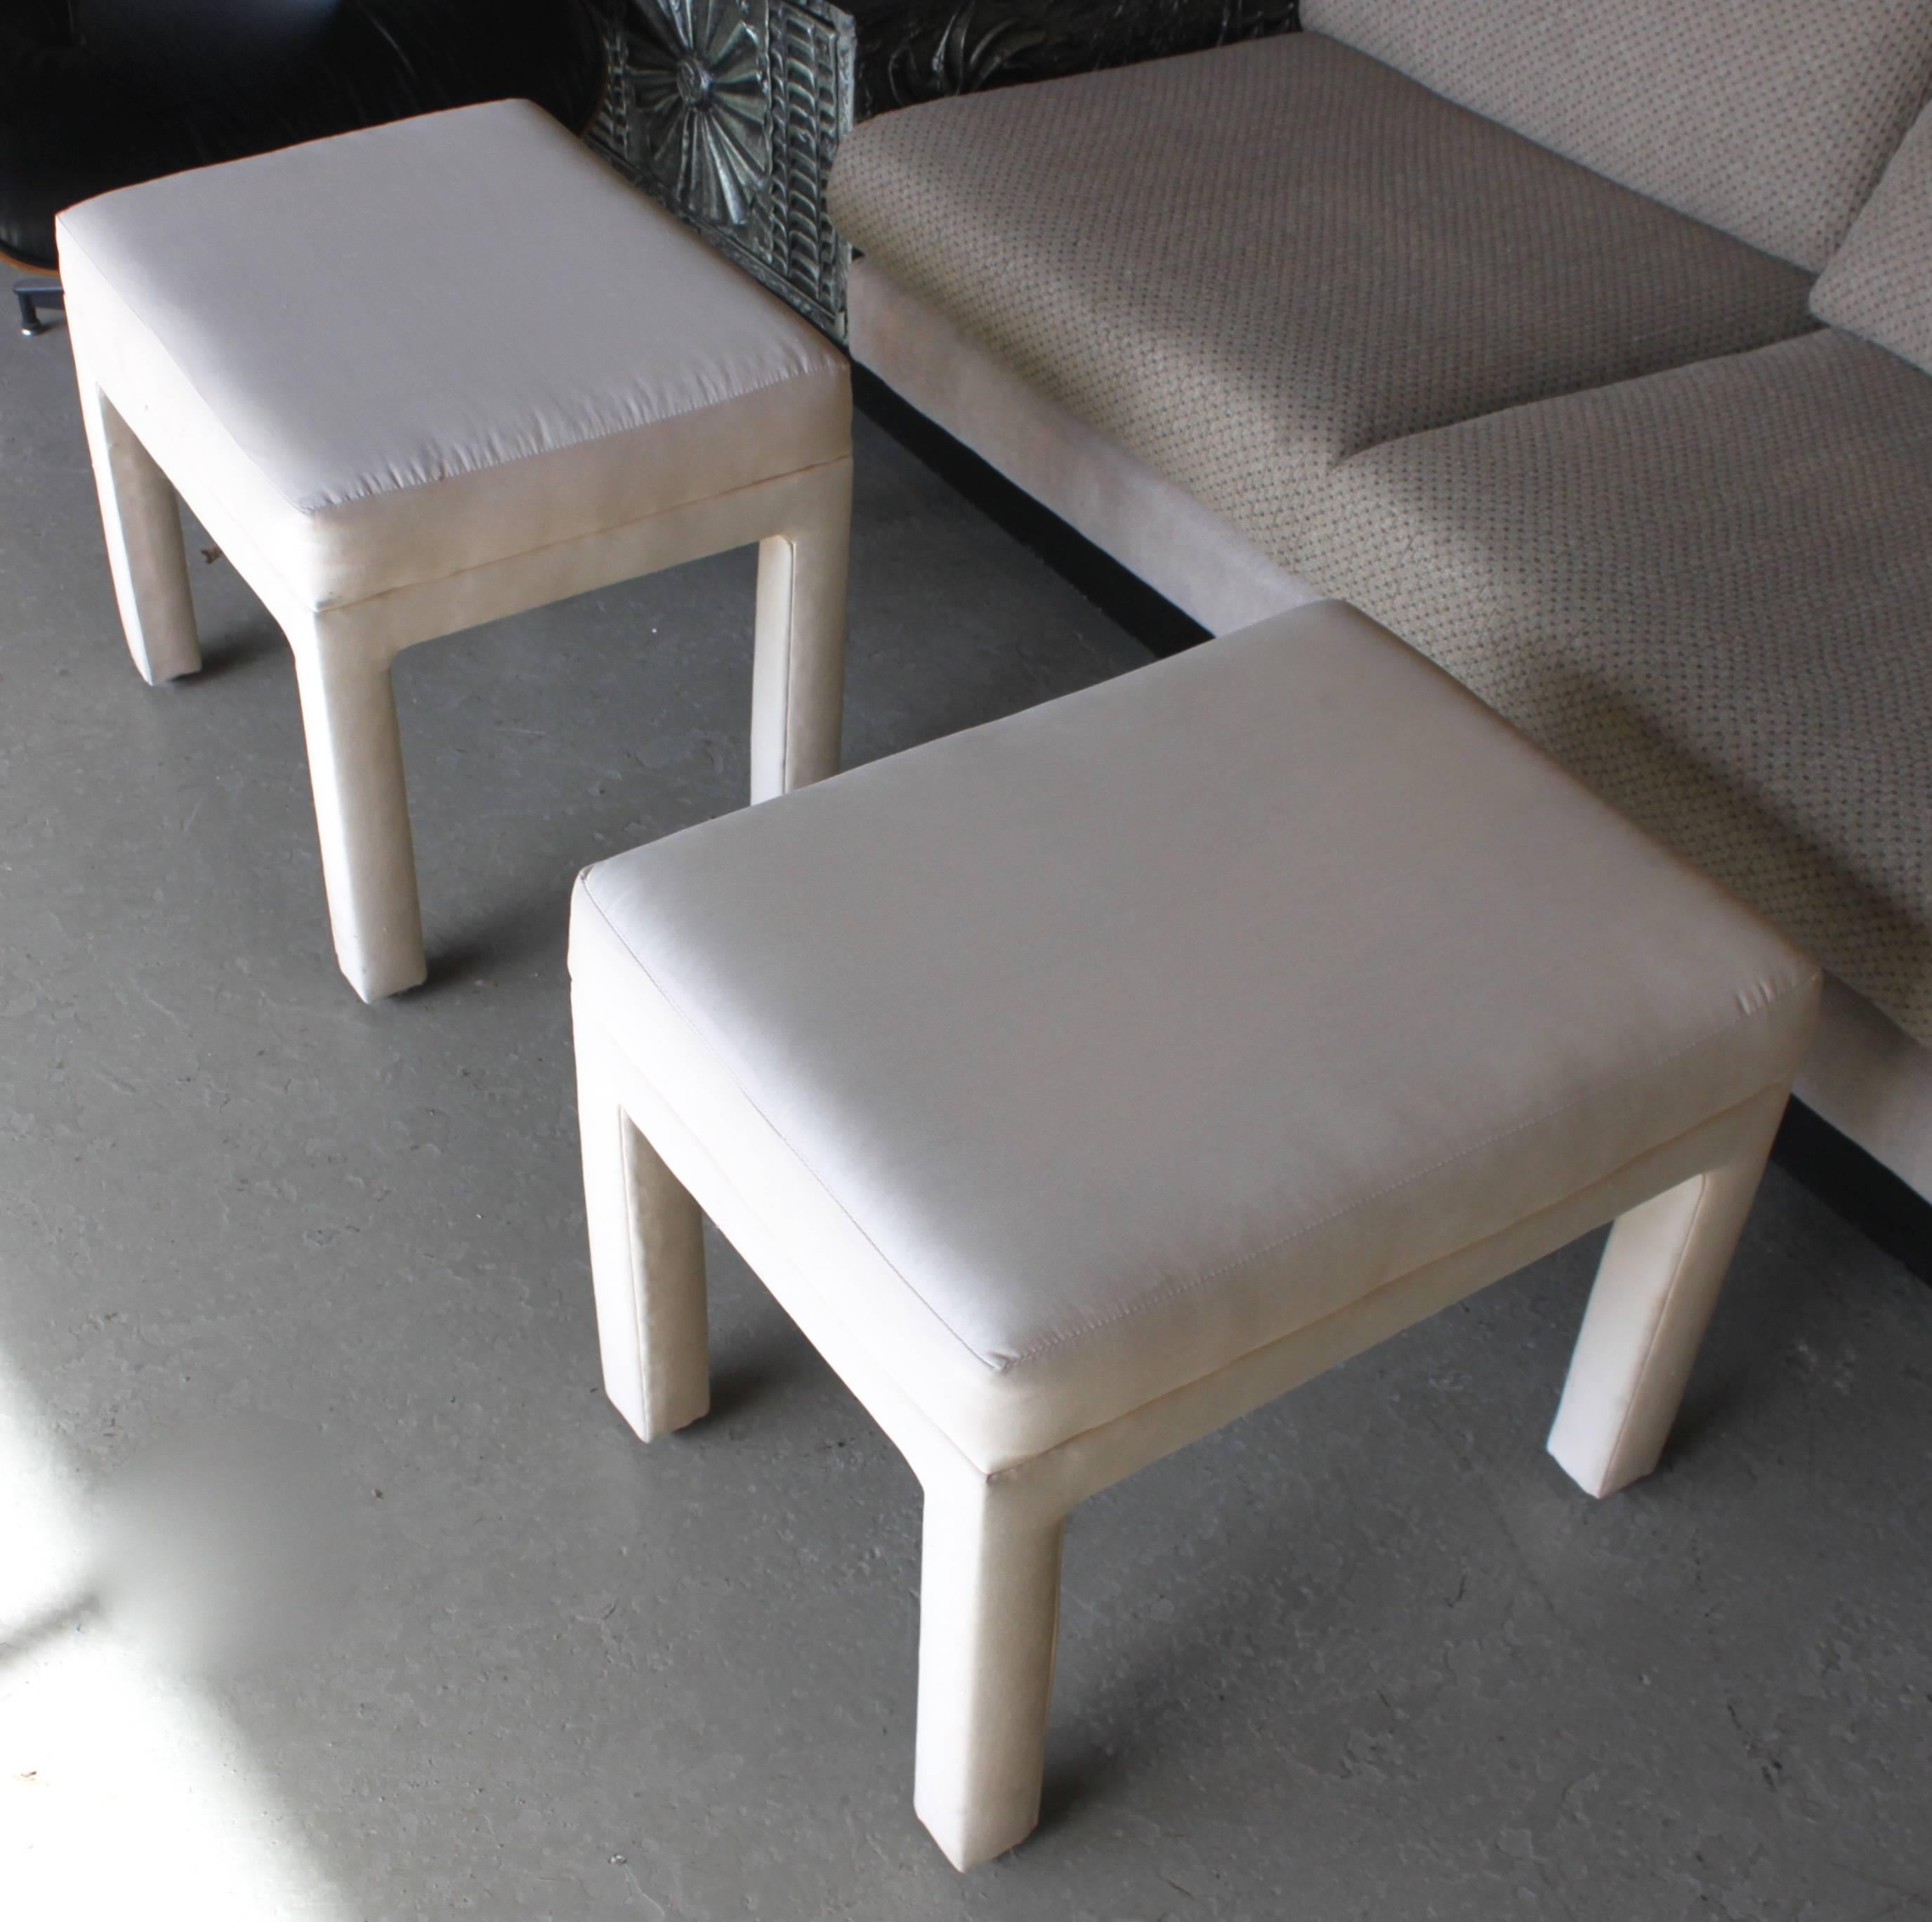 Pair of upholstered stools. We do not guarantee condition of fabric. Condition as shown in pictures.